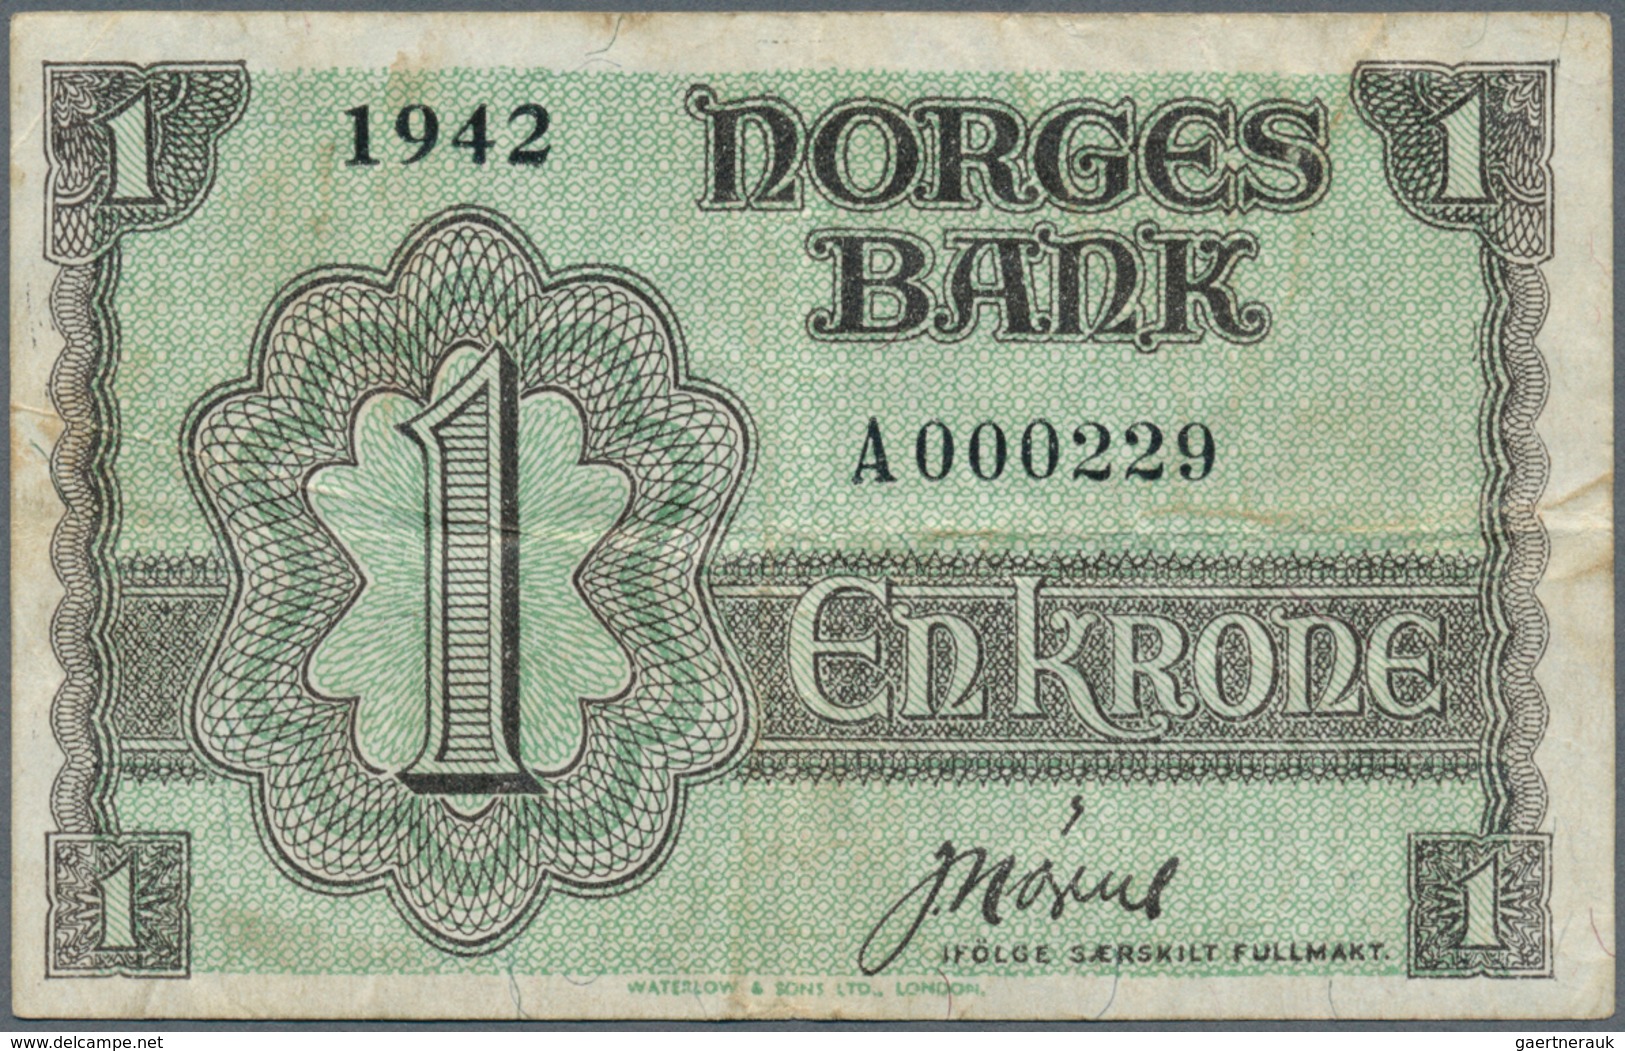 Norway / Norwegen: 1 Krone 1942 P. 17a With Very Low Serial Number #A000229, So This Note Was The 22 - Norwegen